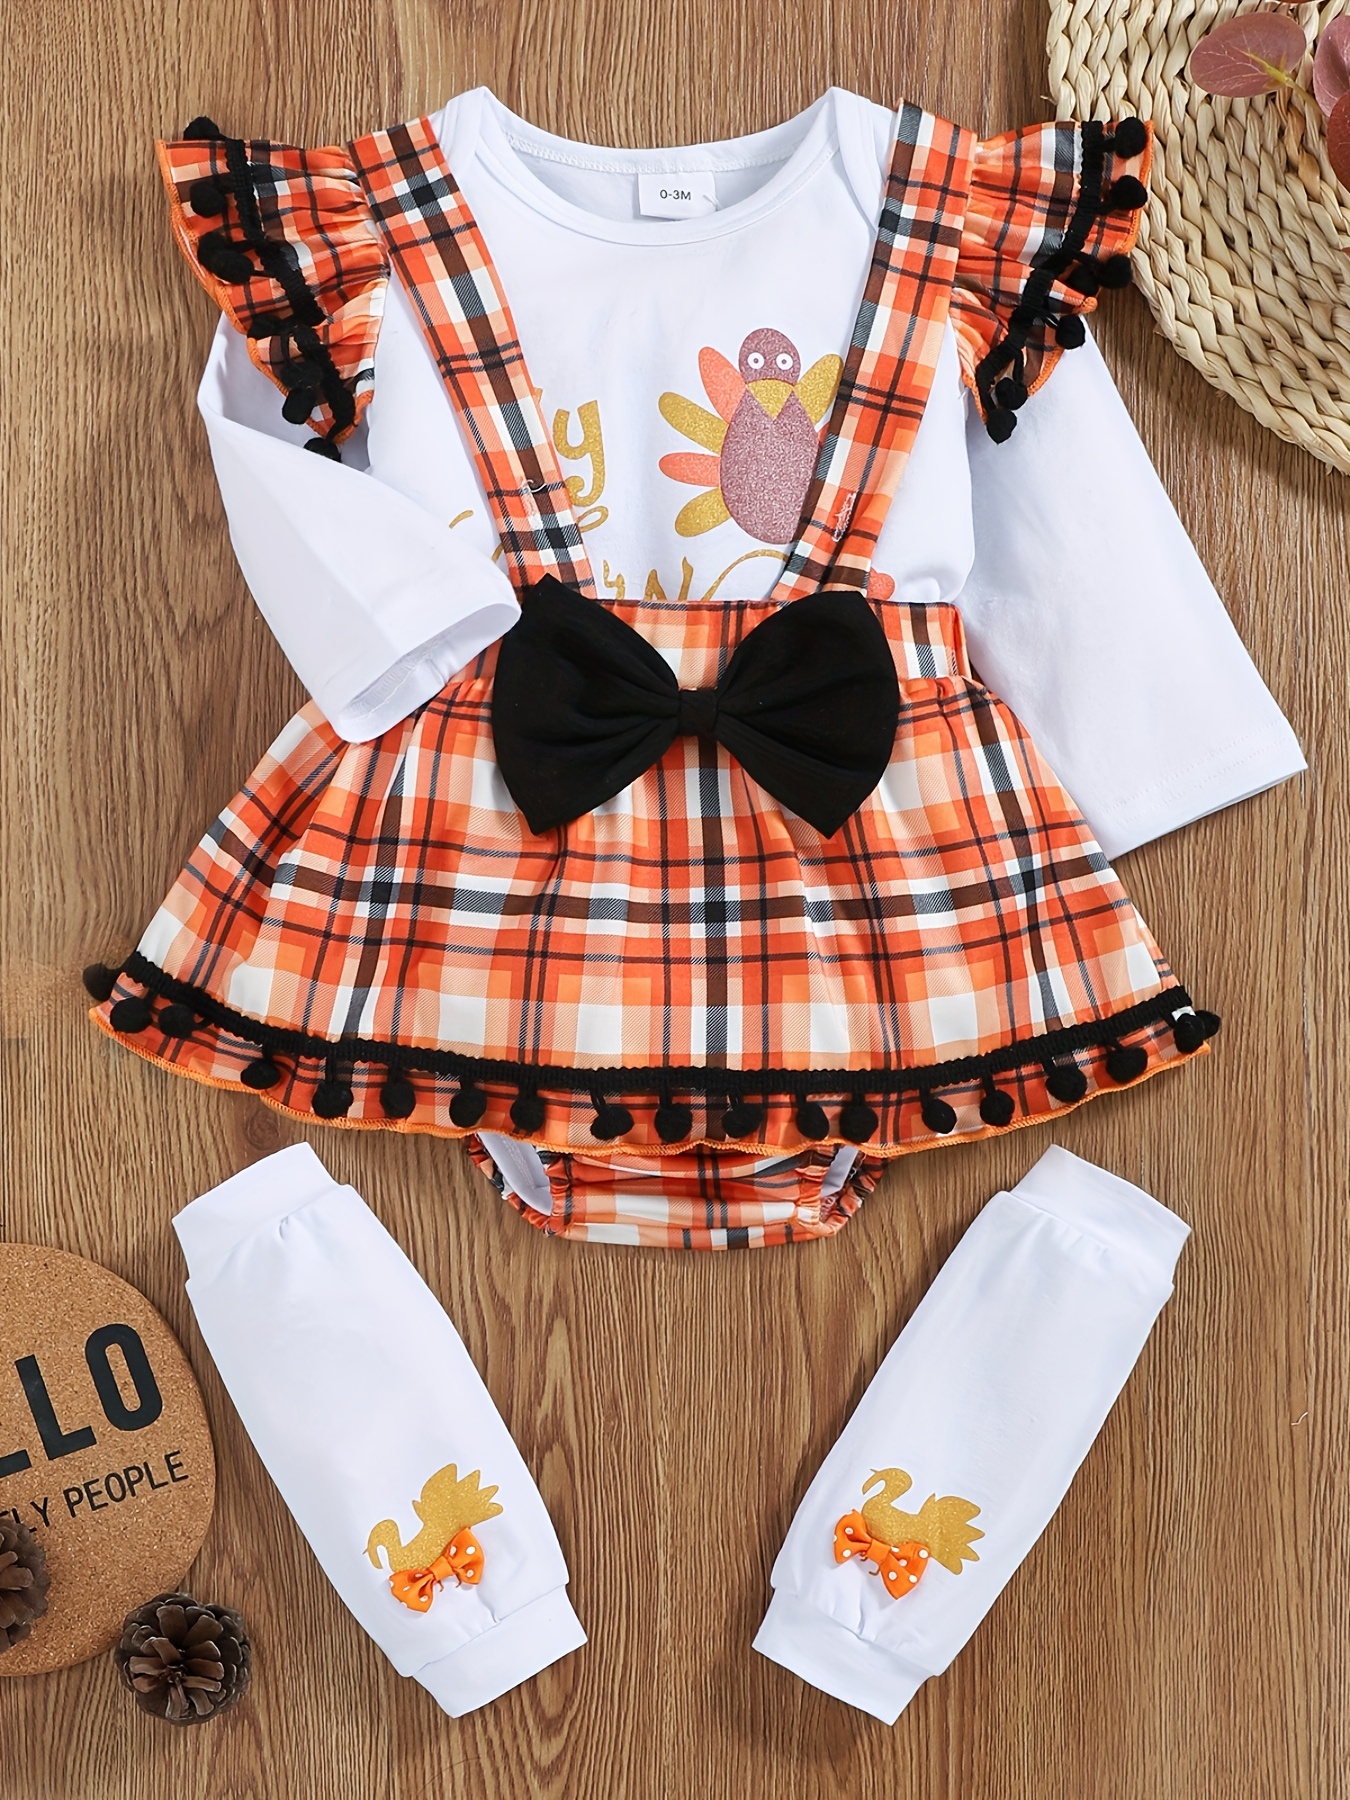 My First Thanksgiving Baby Girl Outfits - Newborn Cute Turkey Graphic Long  Sleeve * Romper Suspender Skirt Set For 0-18 Months